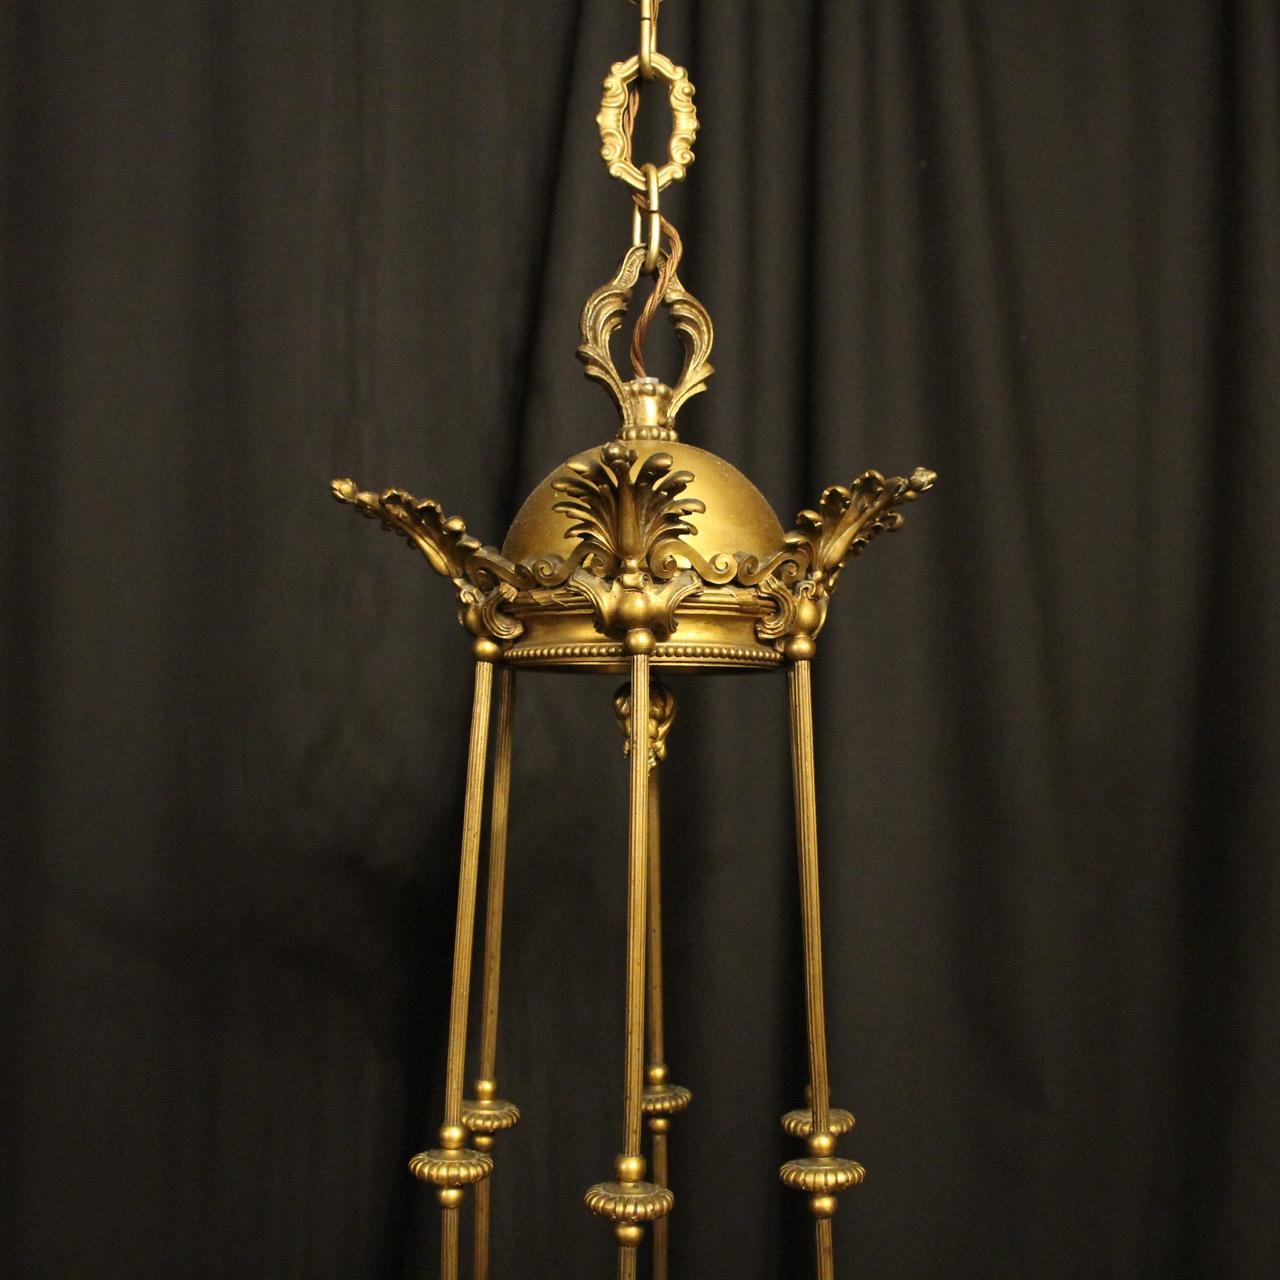 French Mid-19th Century F. Barbedienne Antique Bronze Chandelier For Sale 4